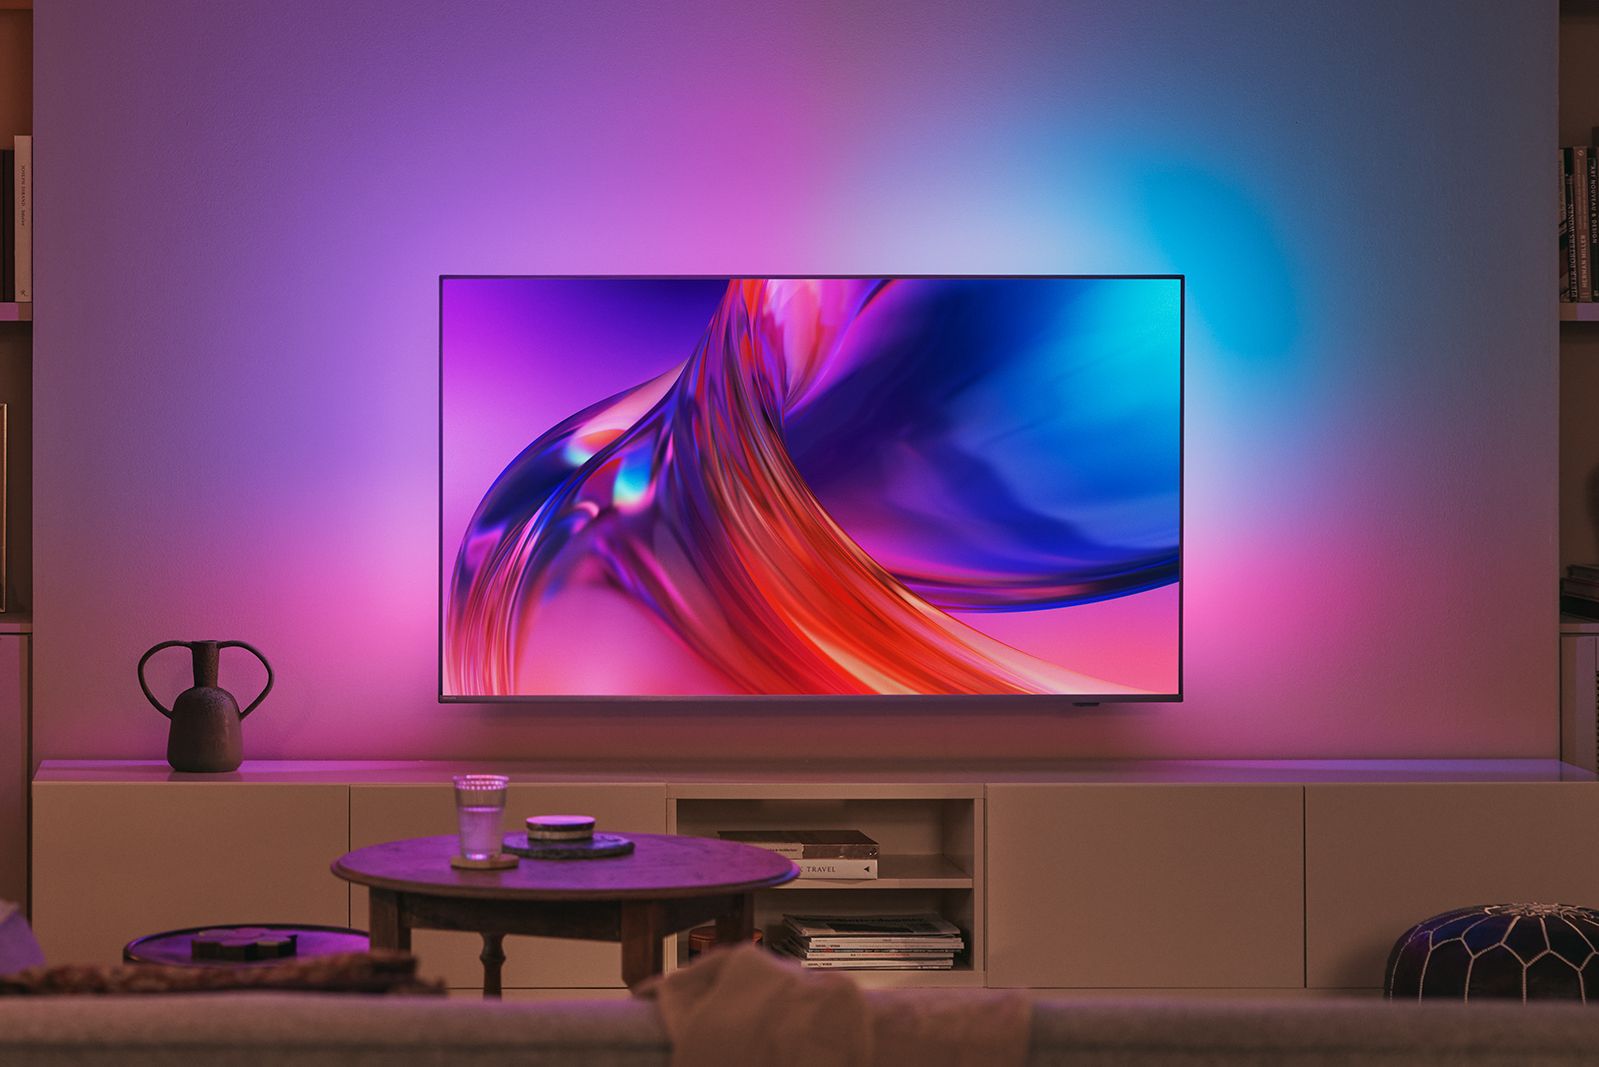 QLED vs OLED TVs: What’s the difference?